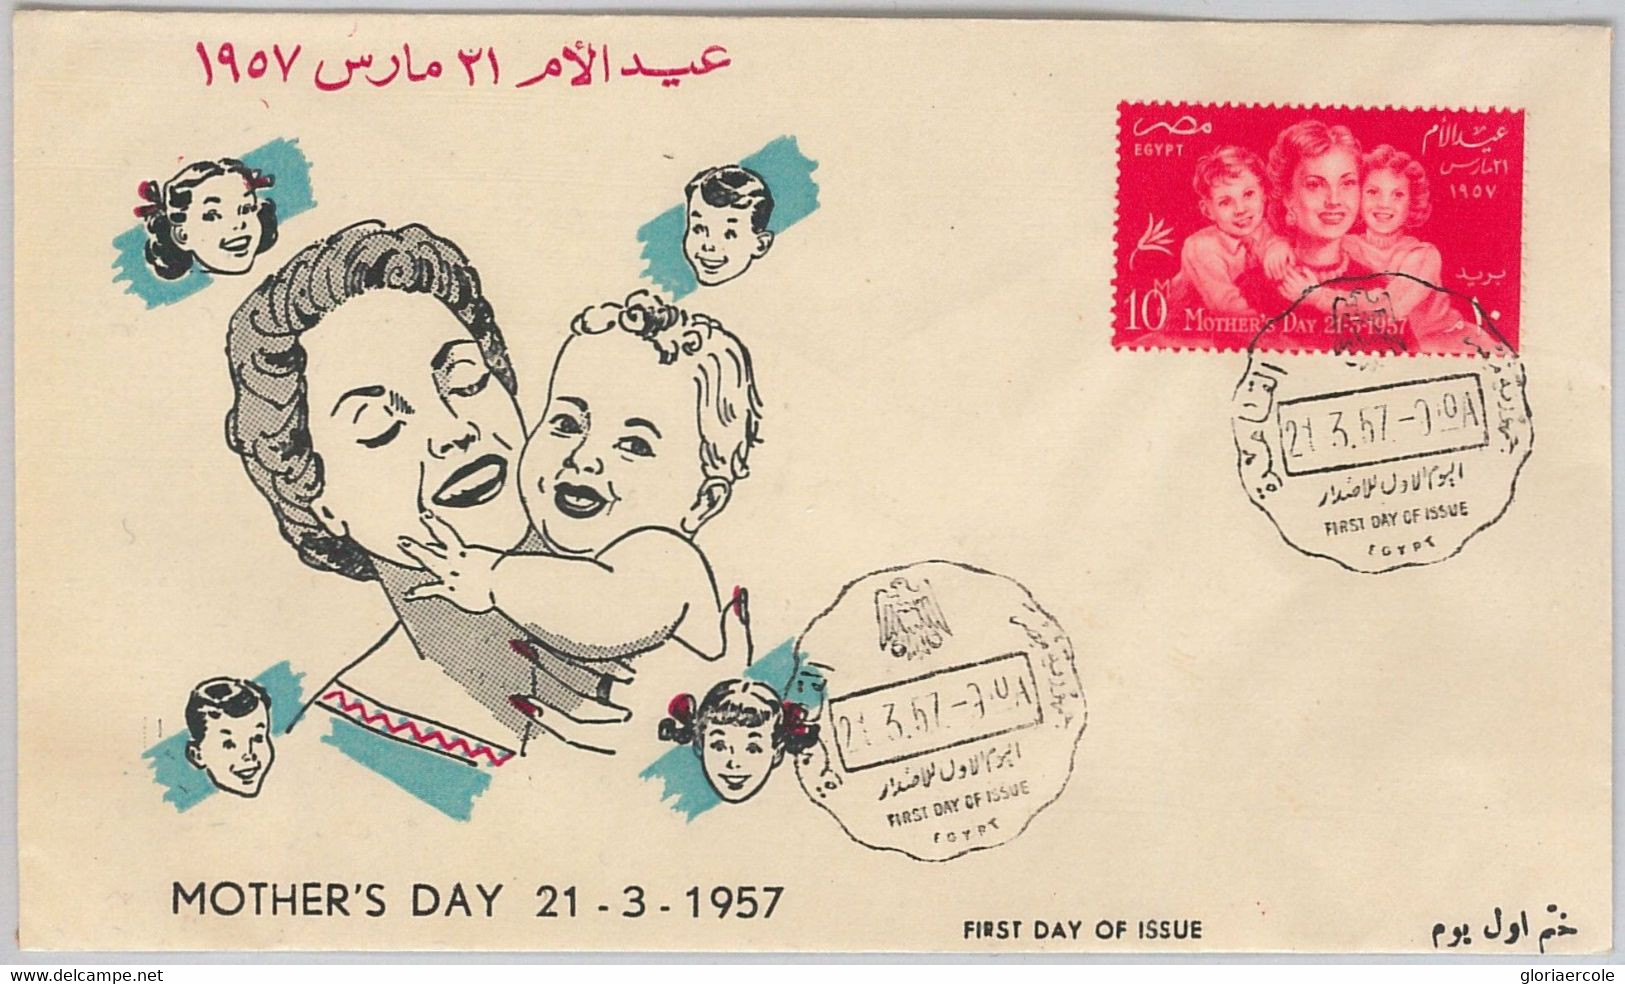 45455- EGYPT مِصر‎ - POSTAL HISTORY - FDC COVER 1959 Scott# 391 Mother’s Day - Muttertag